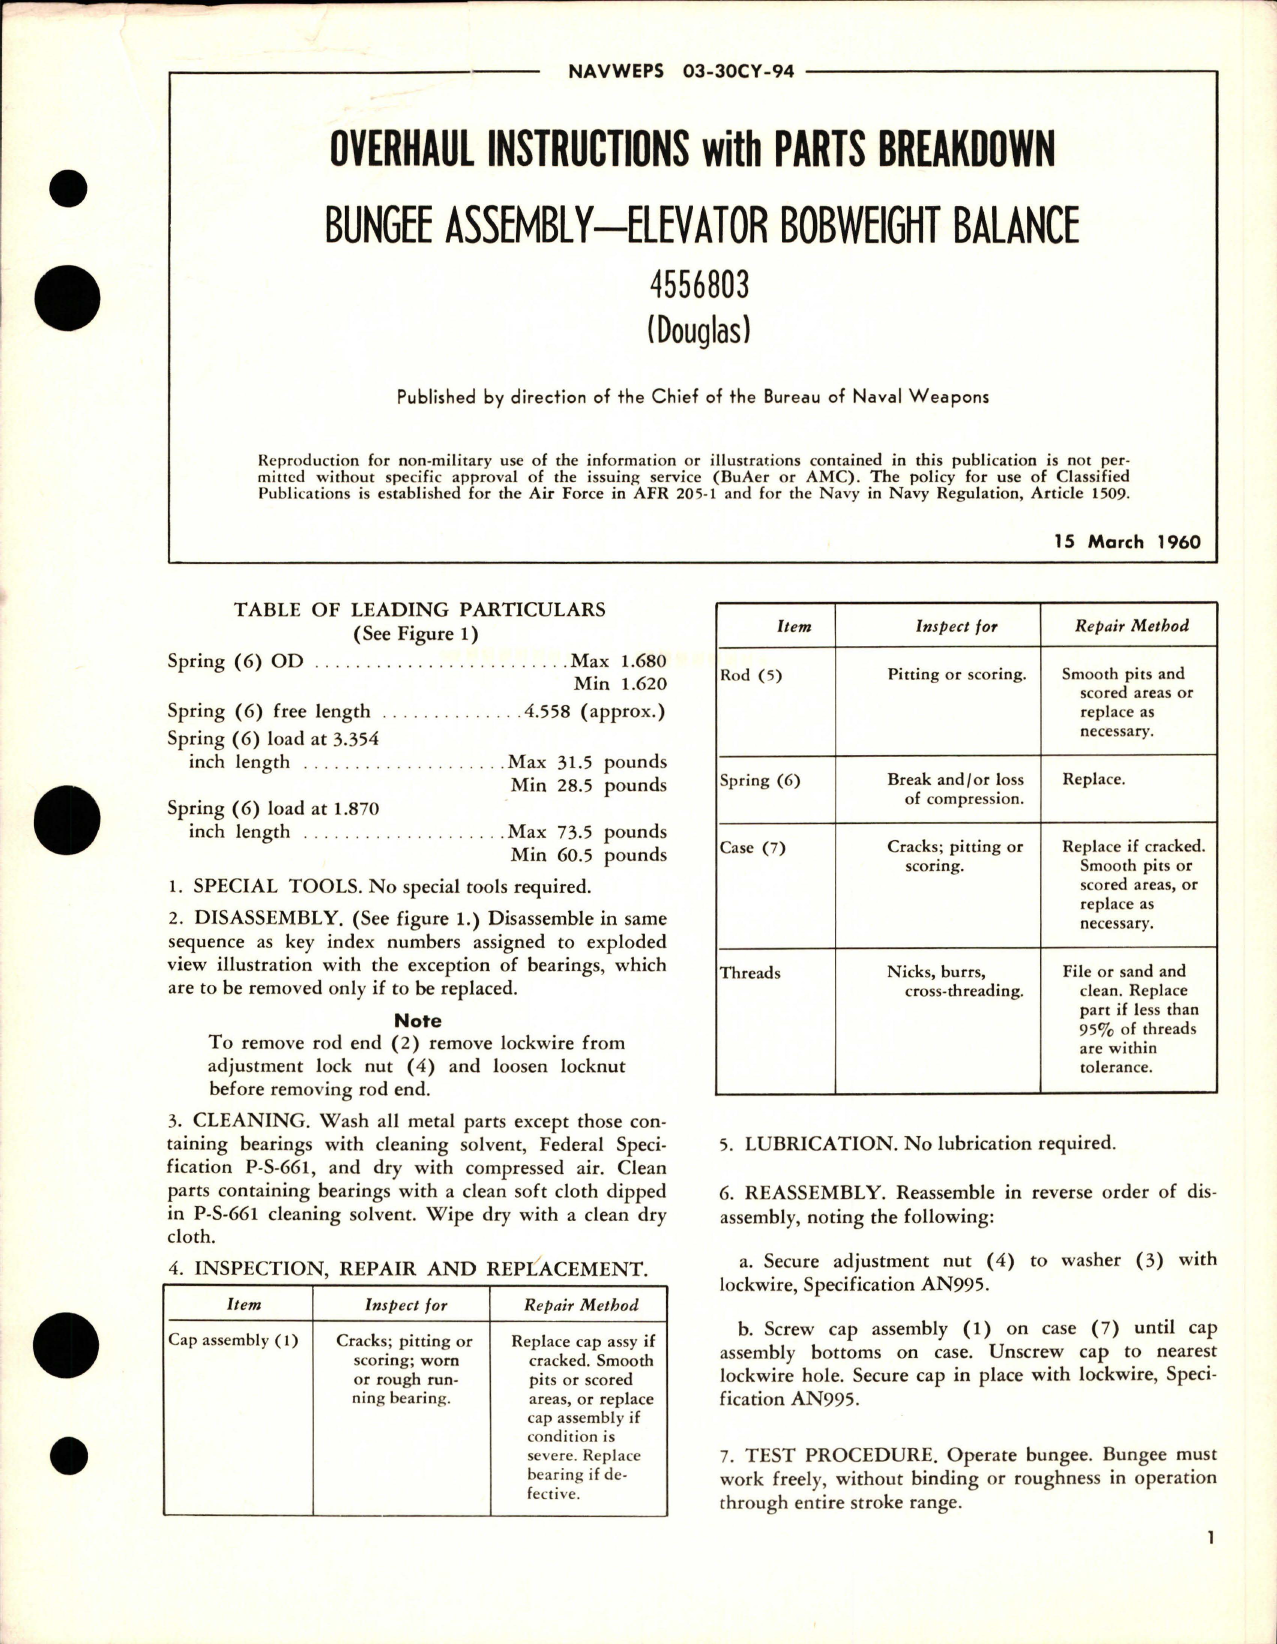 Sample page 1 from AirCorps Library document: Overhaul Instructions with Parts Breakdown for Elevator Bobweight Balance Bungee Assembly - 4556803 